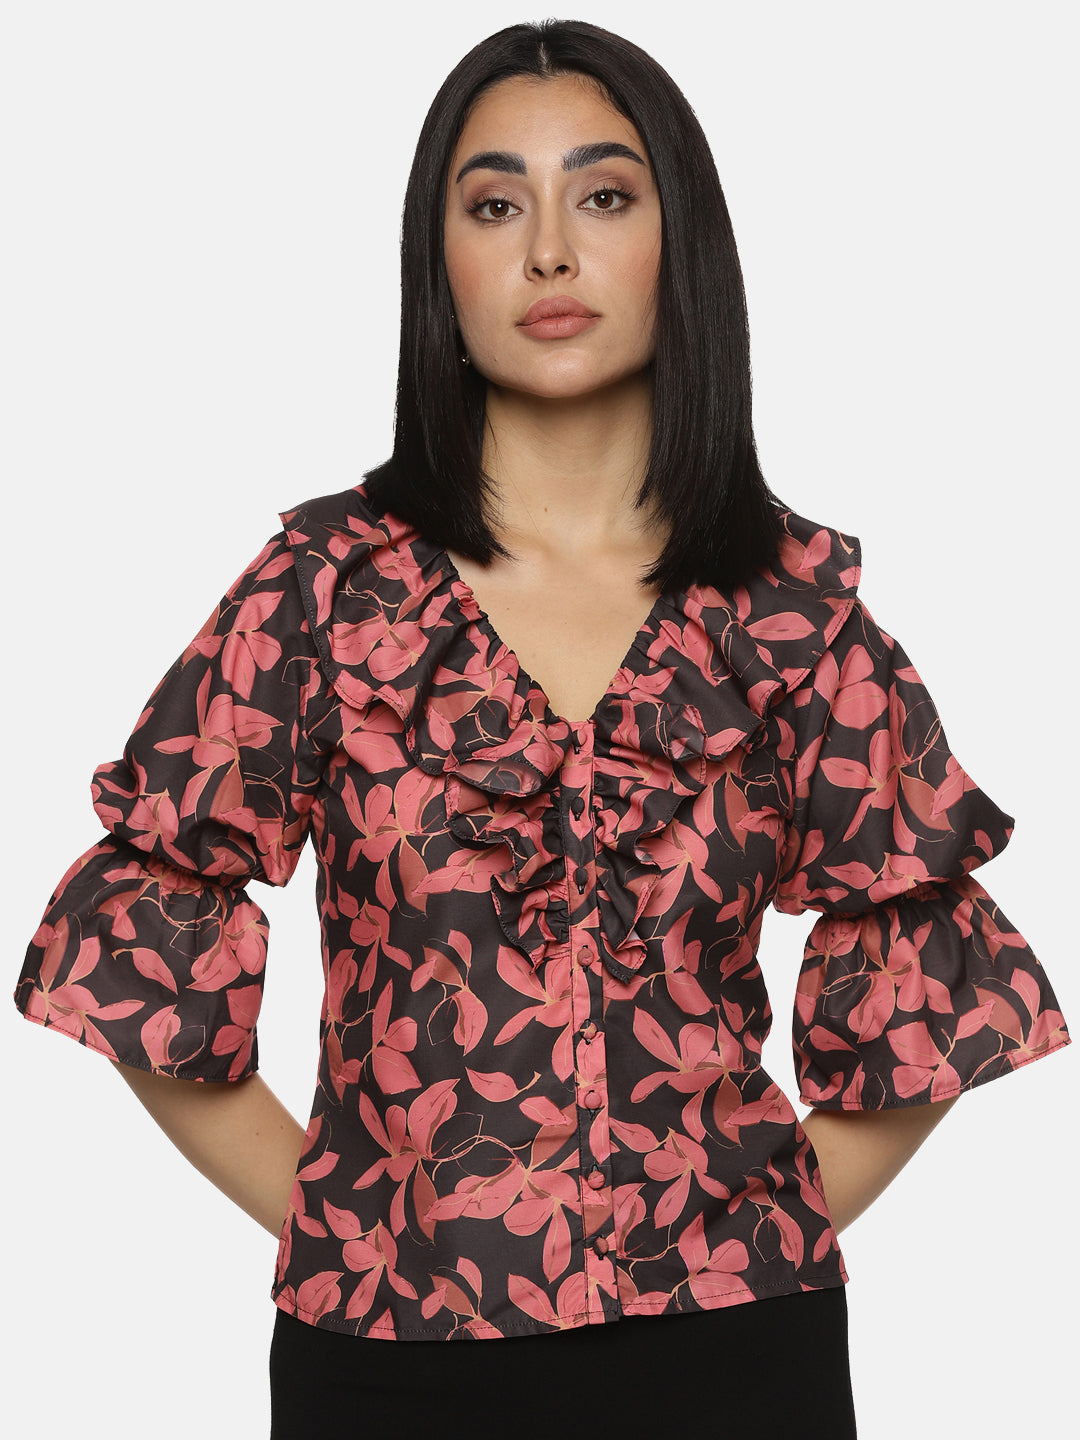 IS.U Floral Black Front Ruffle Top